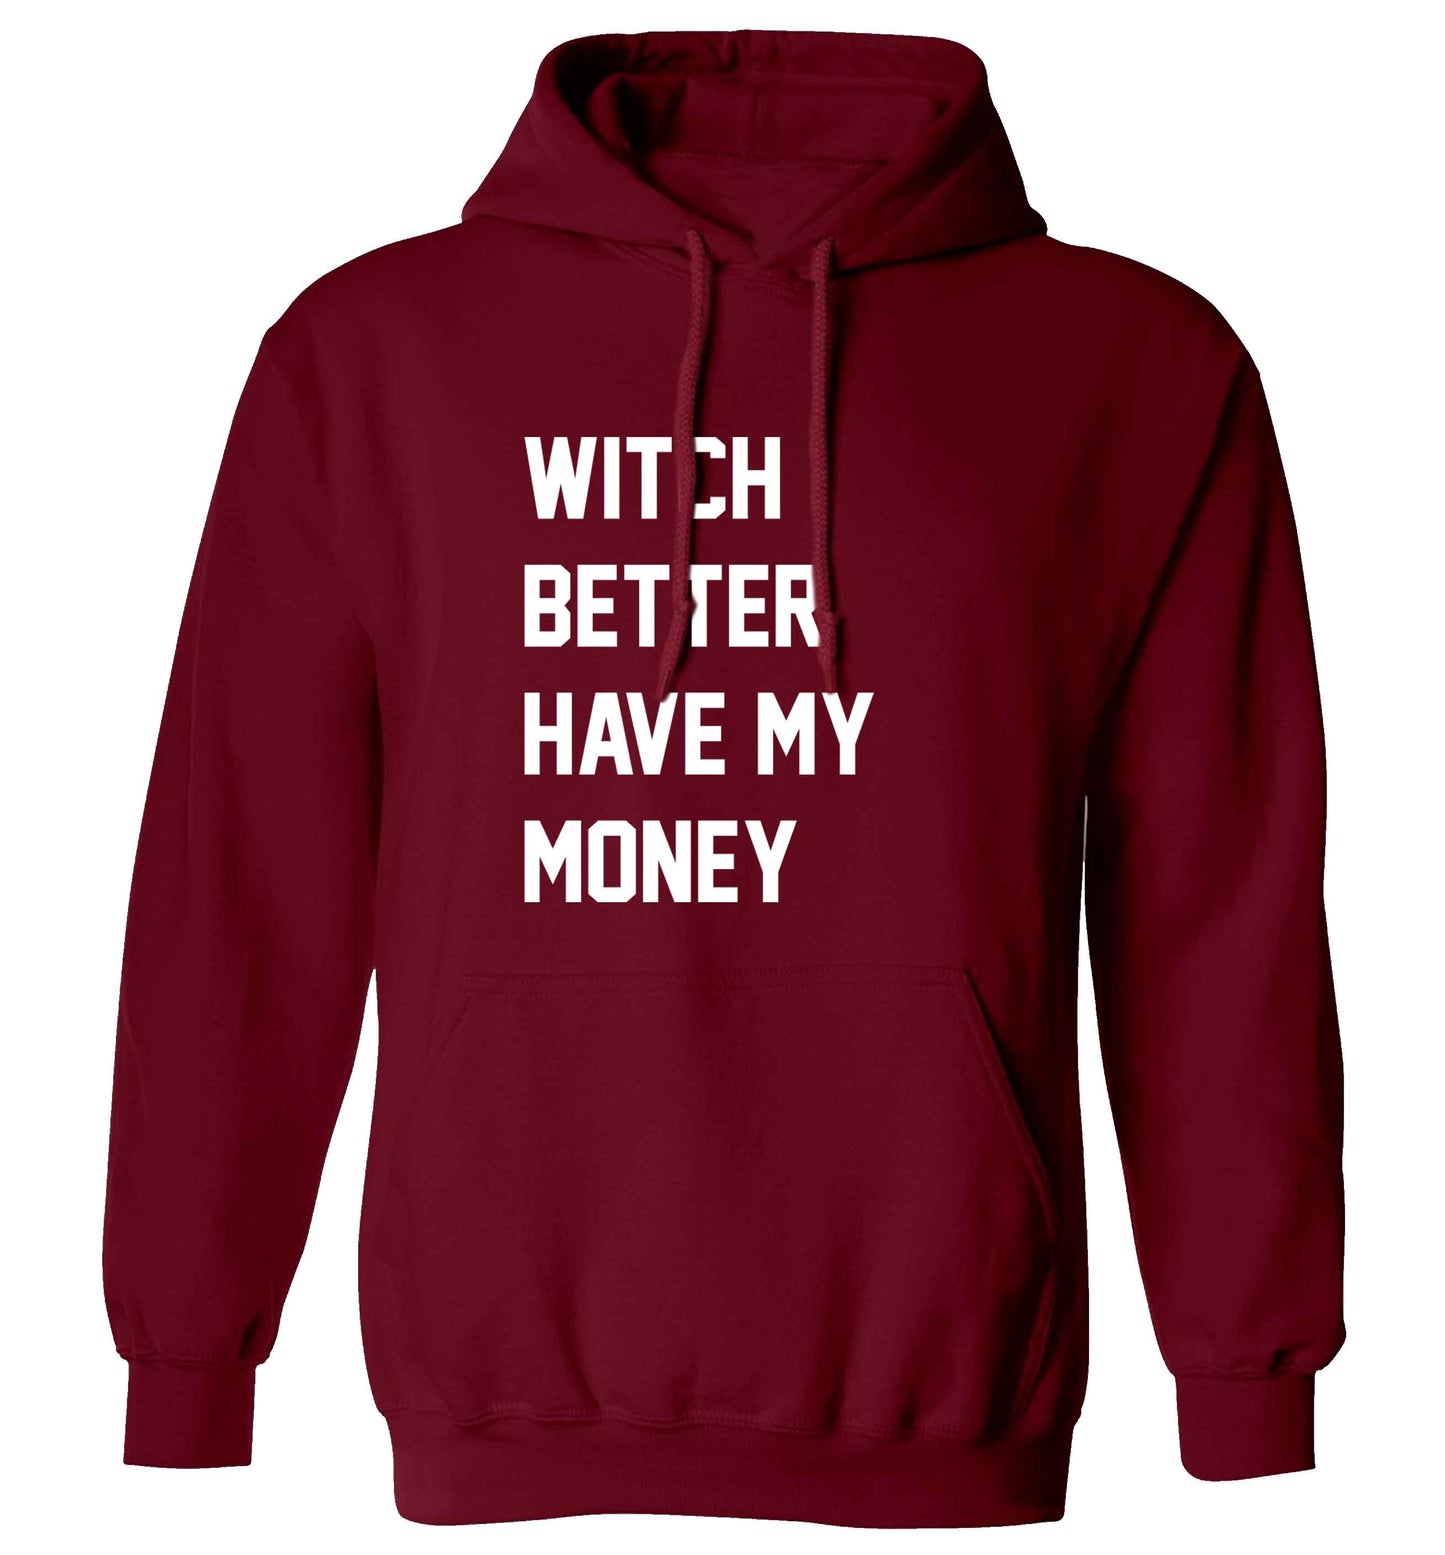 Witch better have my money adults unisex maroon hoodie 2XL